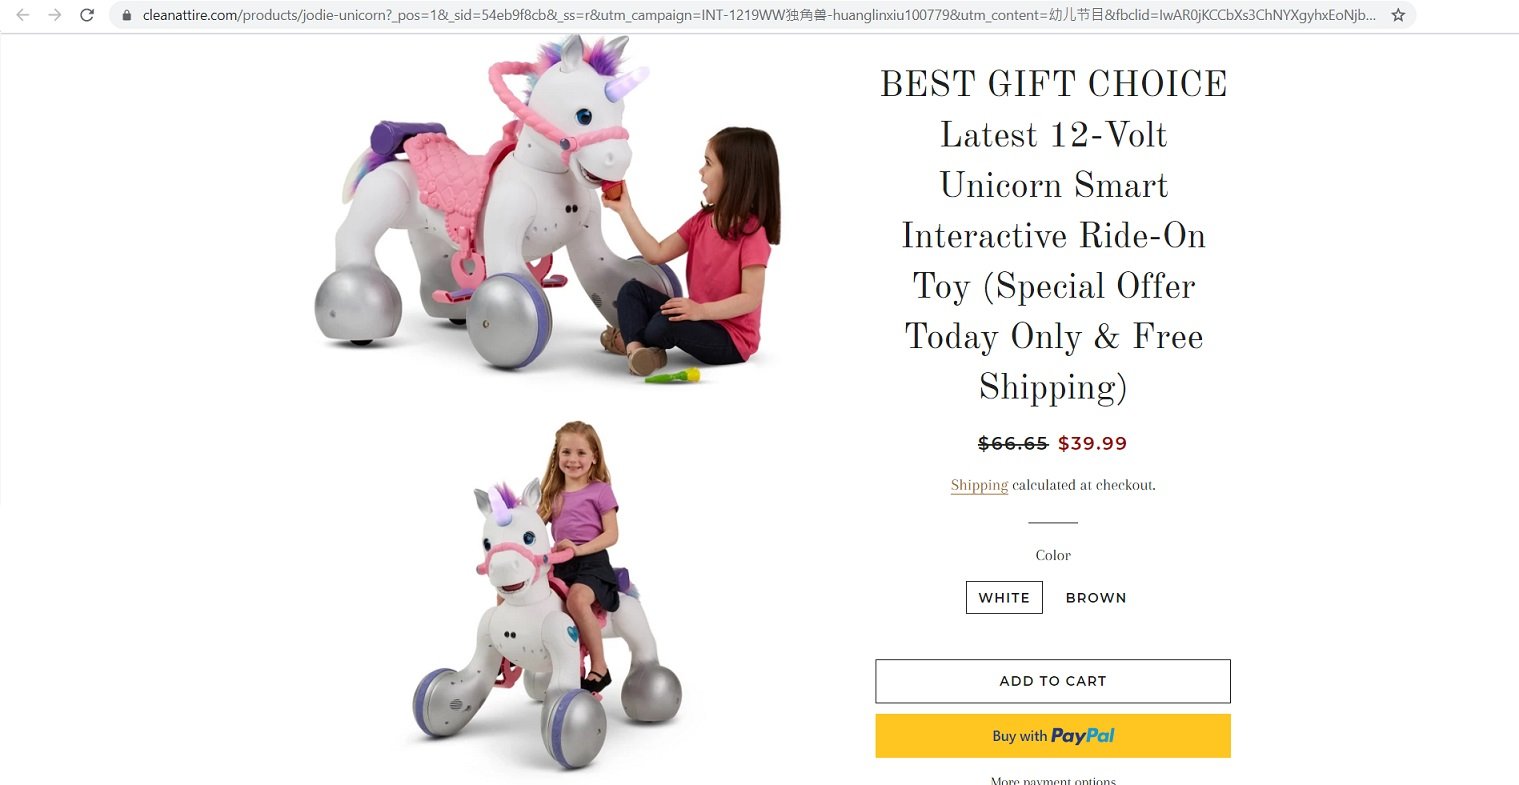 Unicorn Smart Interactive Ride-On Toy Fake Stores